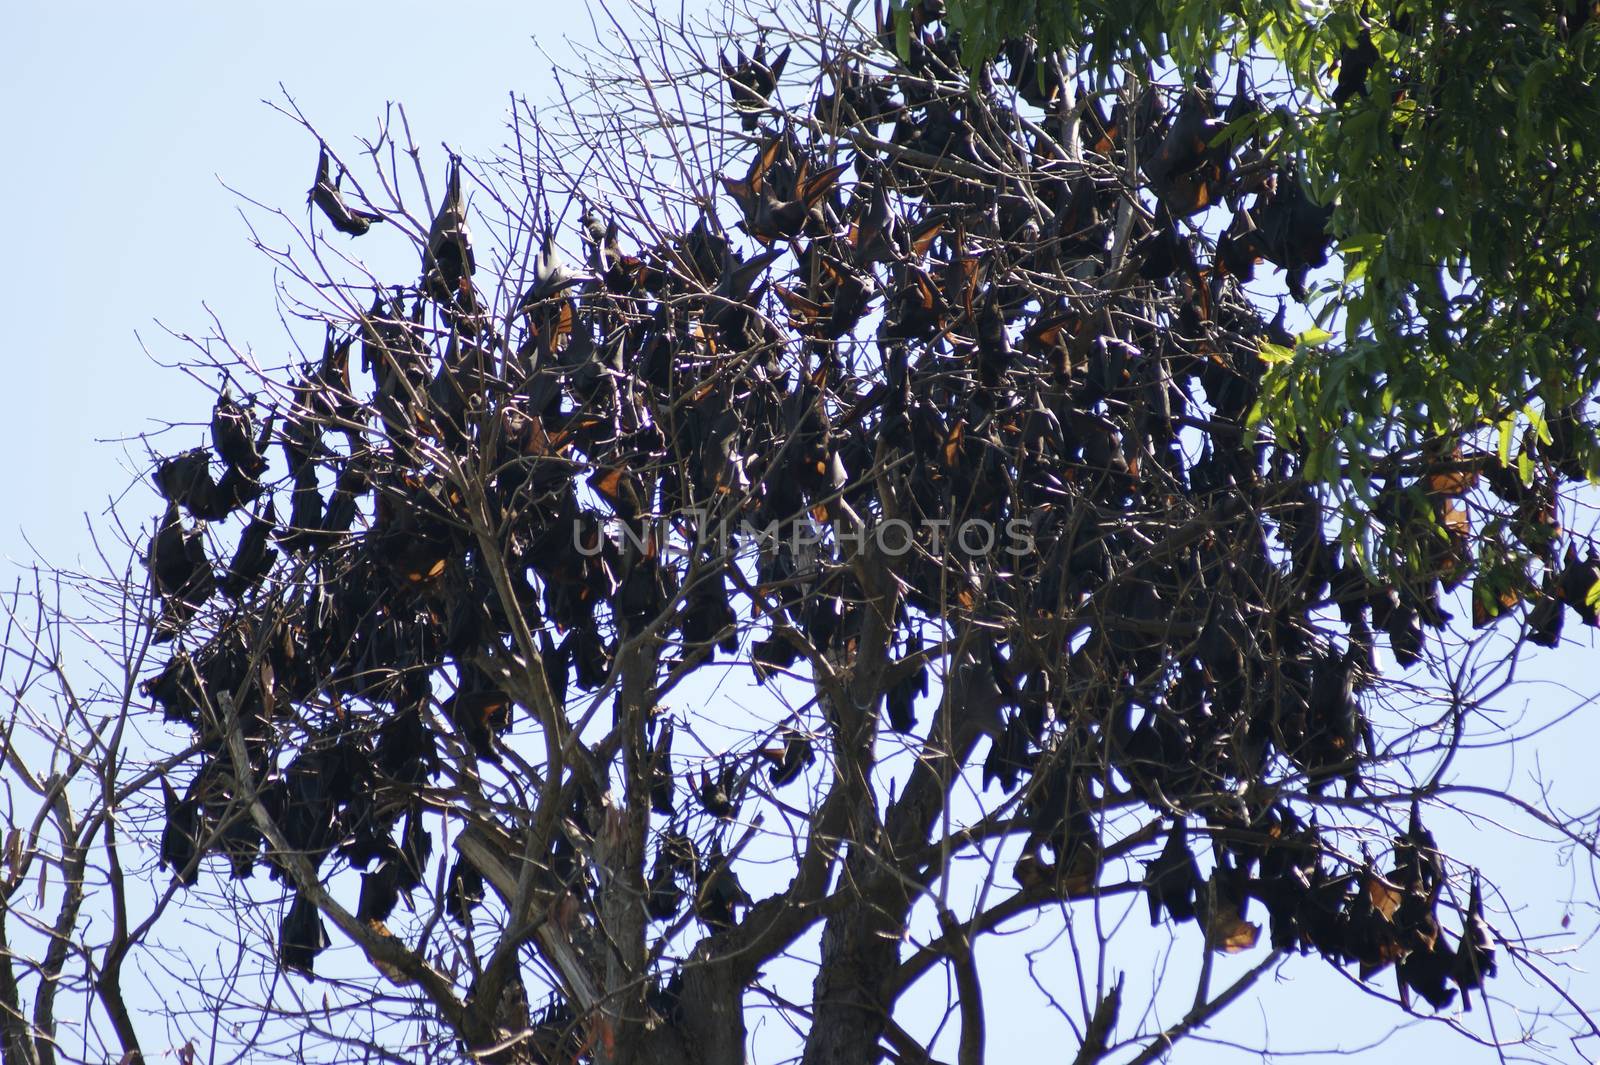 hordes of bats on the tree